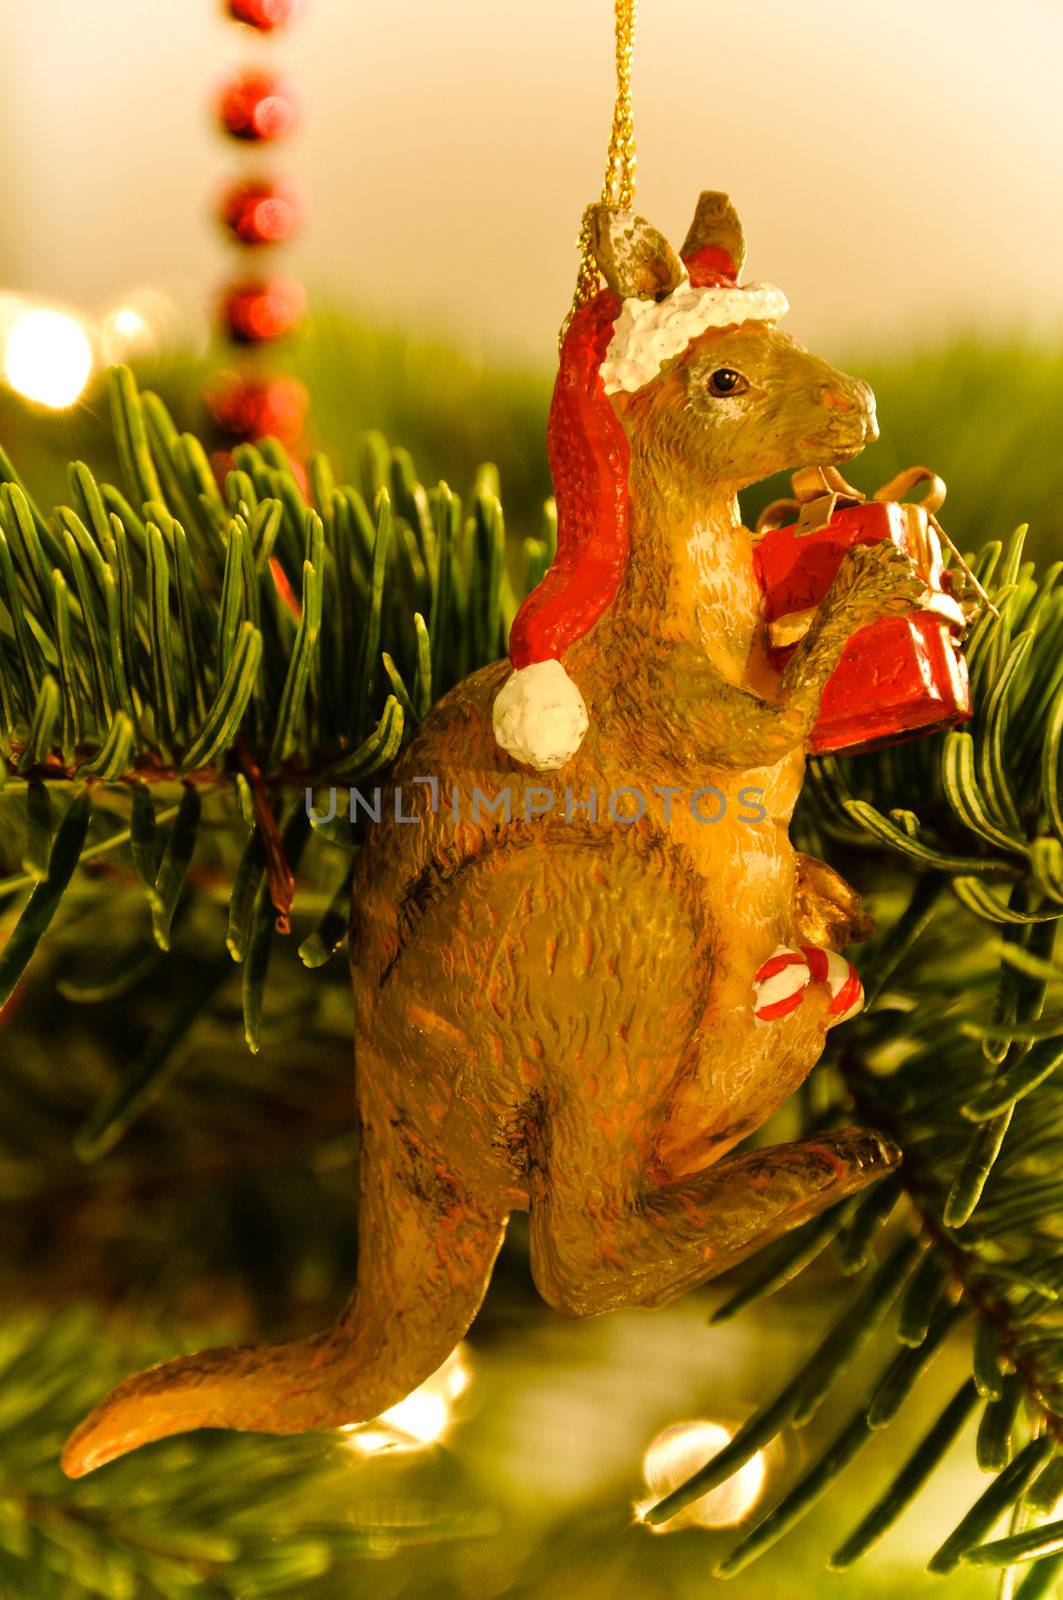 Christmas Tree Decoration - Australian Kangaroo with presents and Santa Claus�s hat, hanging in Tree with lights and other decoration visible